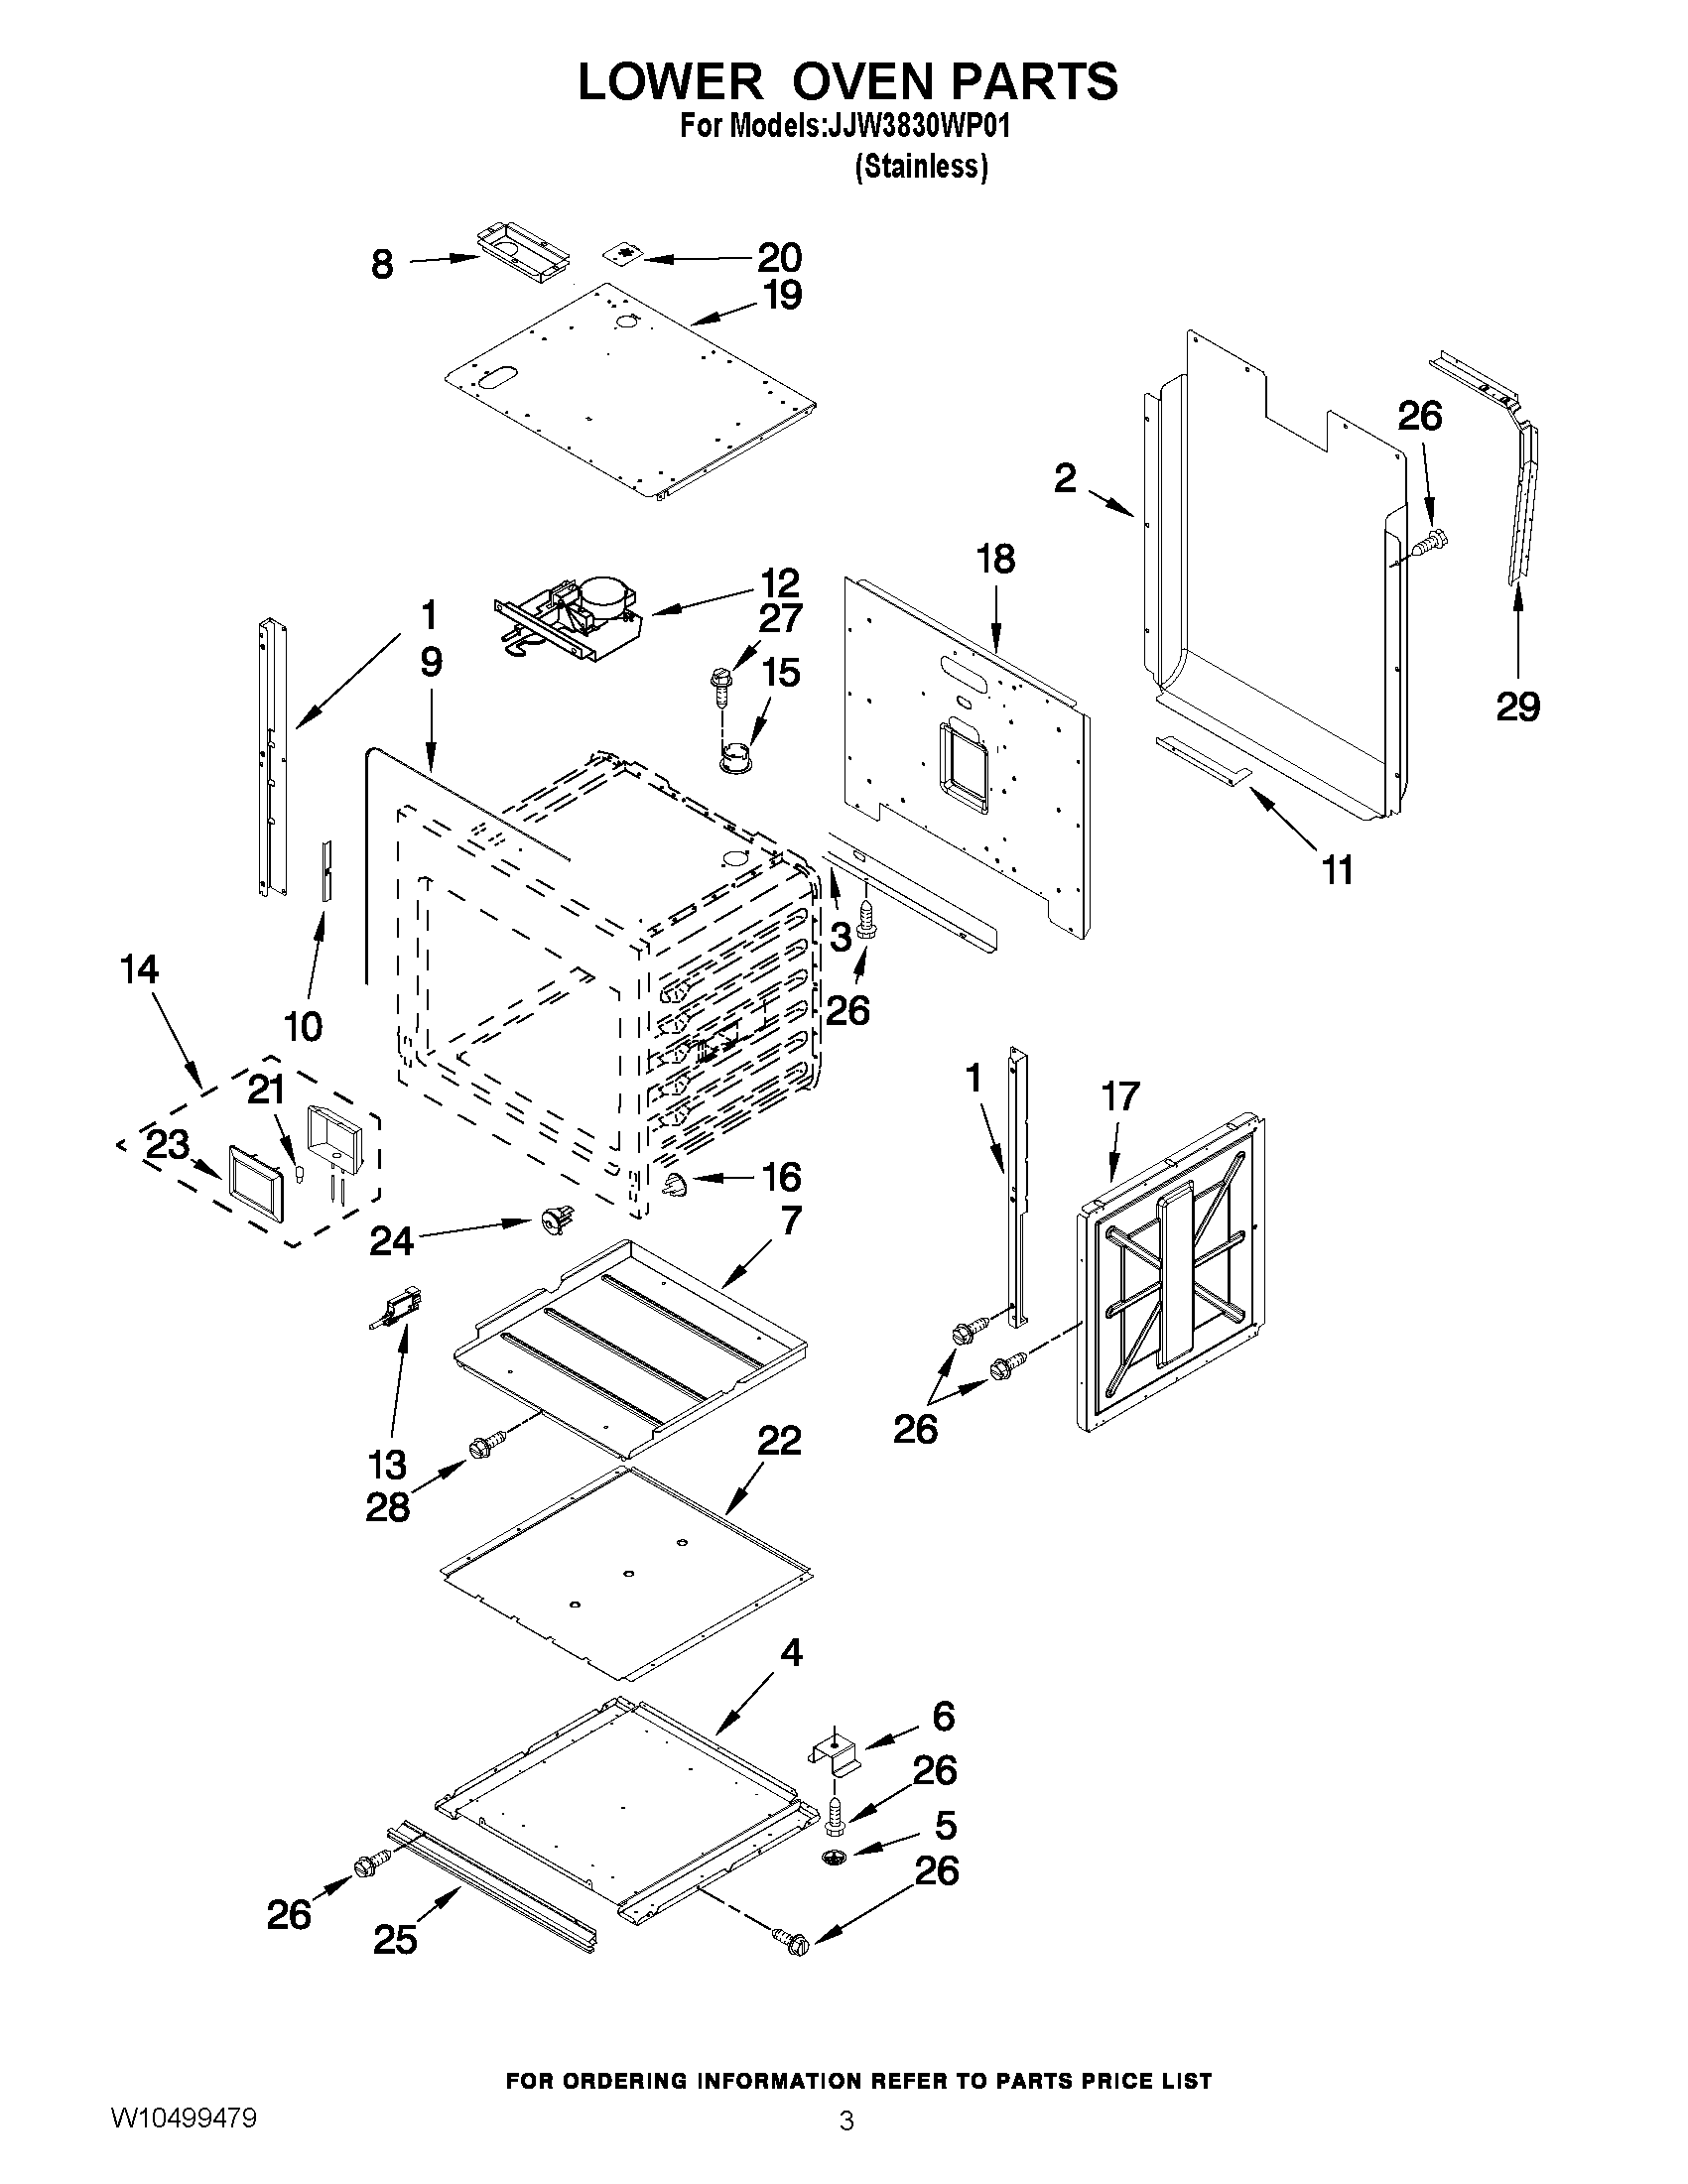 02 - LOWER OVEN PARTS